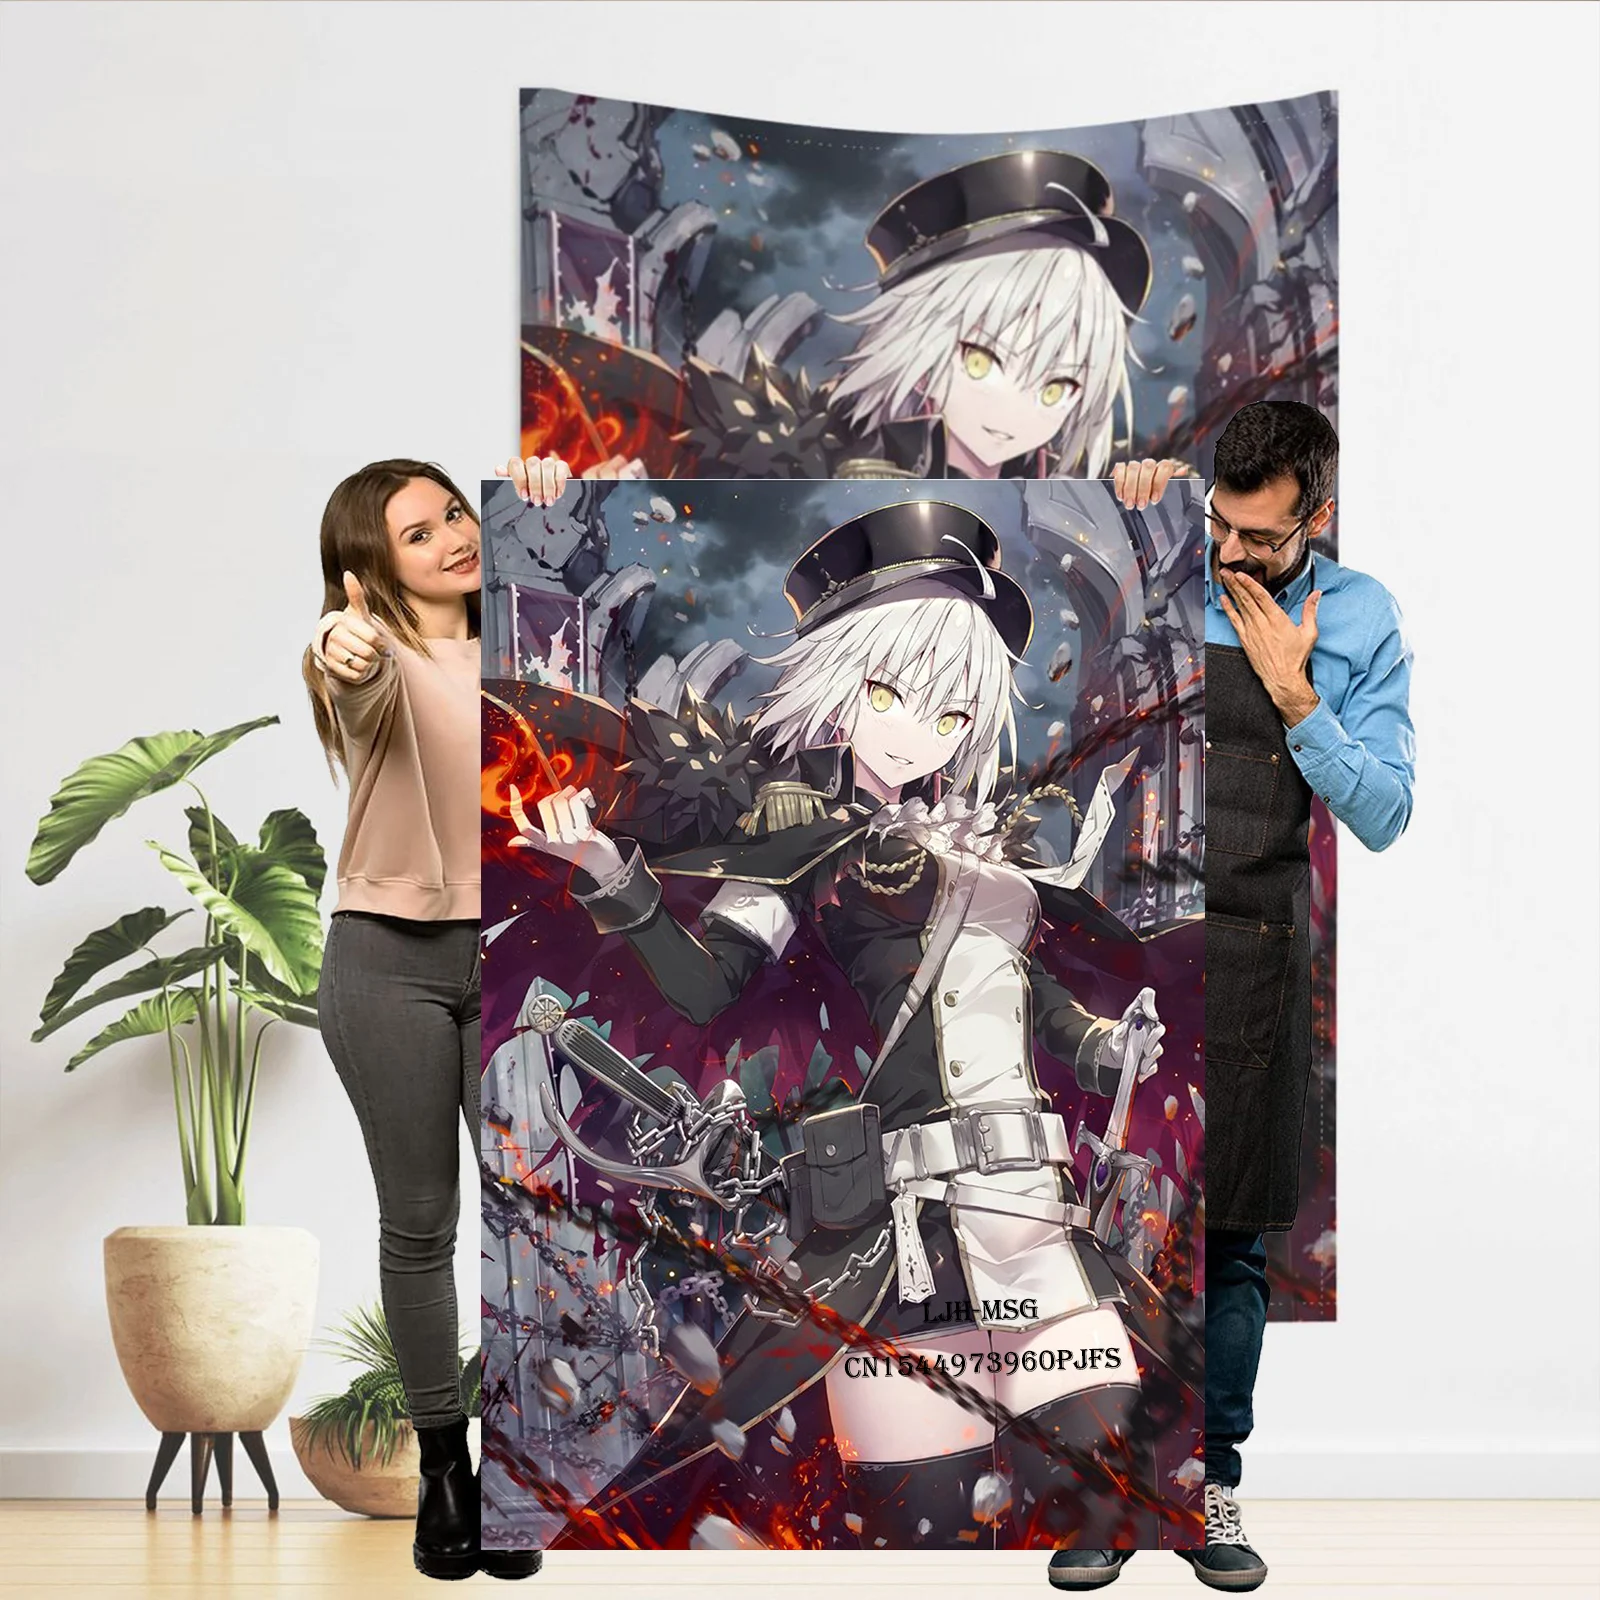 

Fate Grand Order Tapestry Hentai Anime Poster Wall Hanging Artist CG Tapestries Sexy Adult Tapestrys H FGO Doujinshi Tapestrys